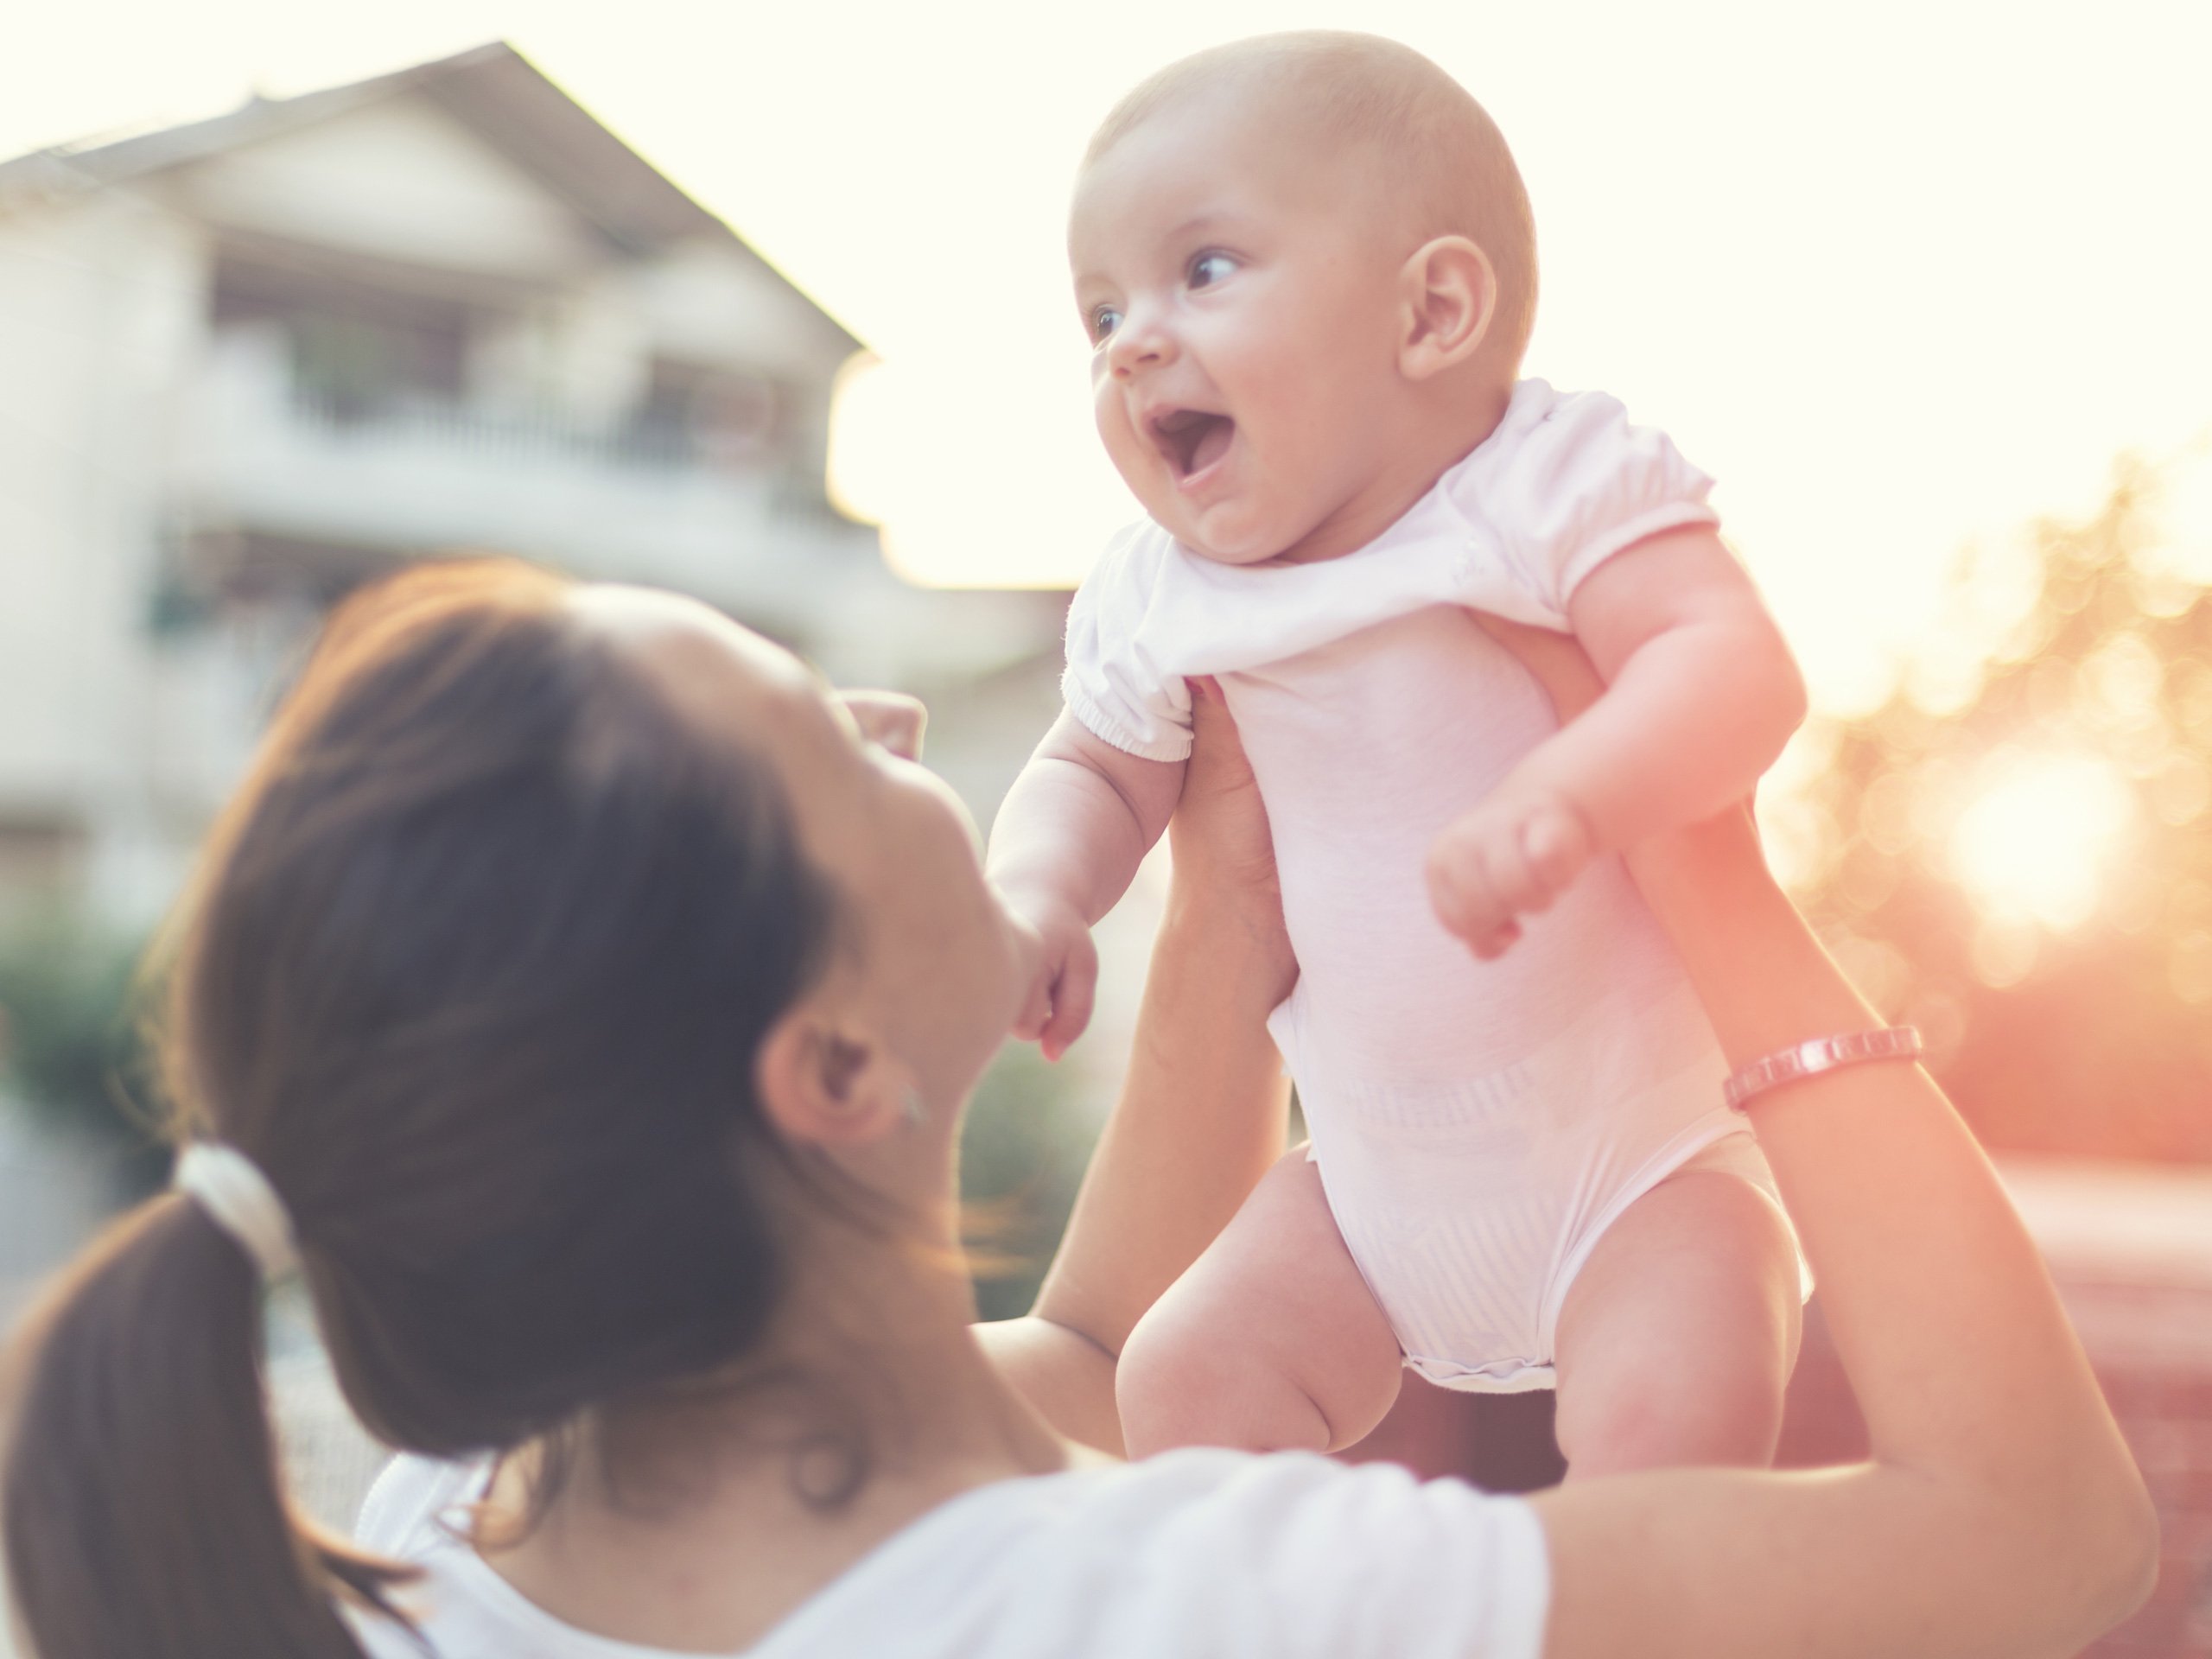 8 ways to deal with your high-needs baby